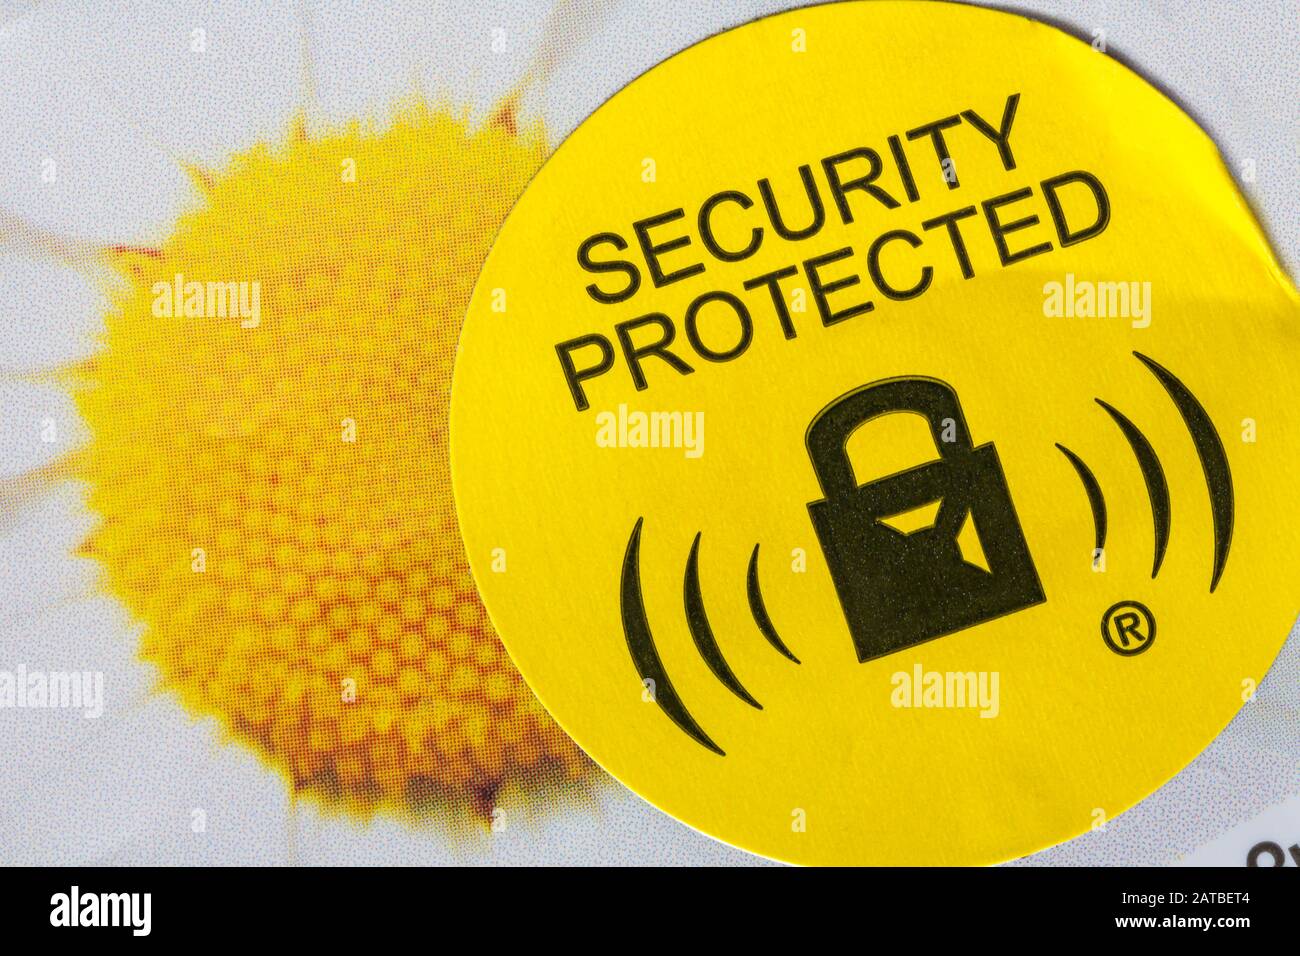 Security Protected Stickers 